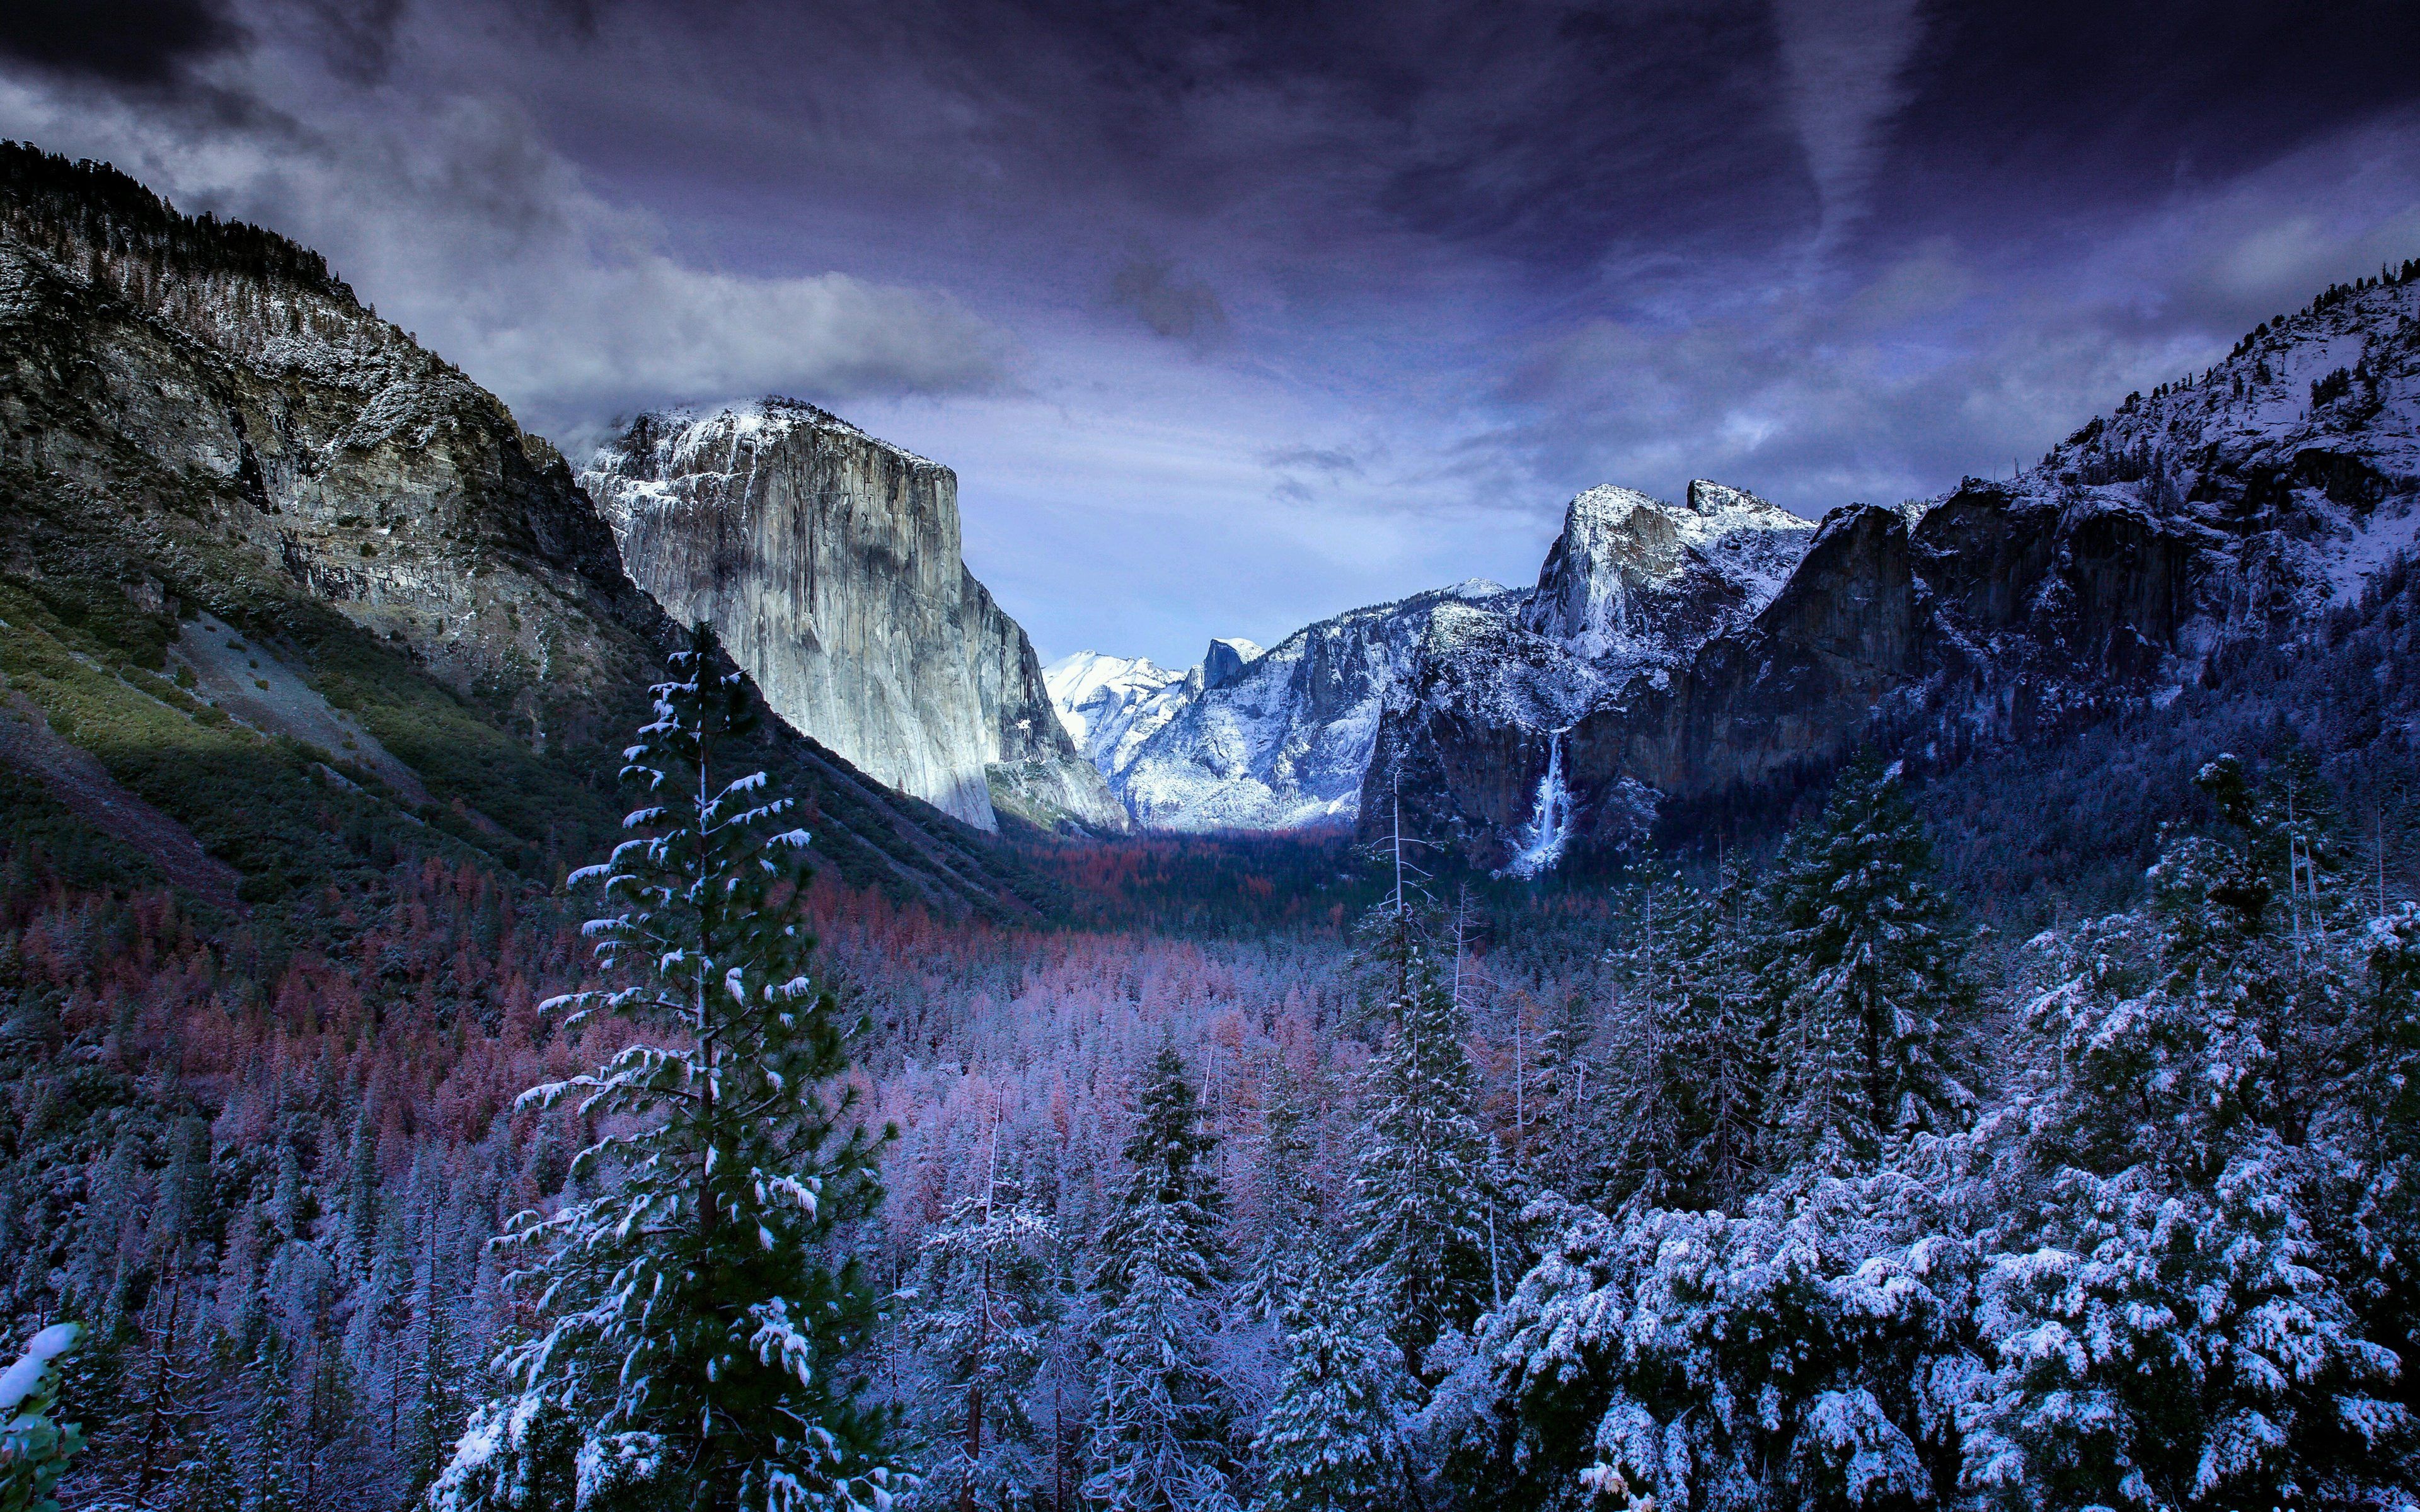 Download wallpaper Yosemite Valley, 4k, winter, american landmarks, Yosemite National Park, forest, California, USA, America for desktop with resolution 3840x2400. High Quality HD picture wallpaper